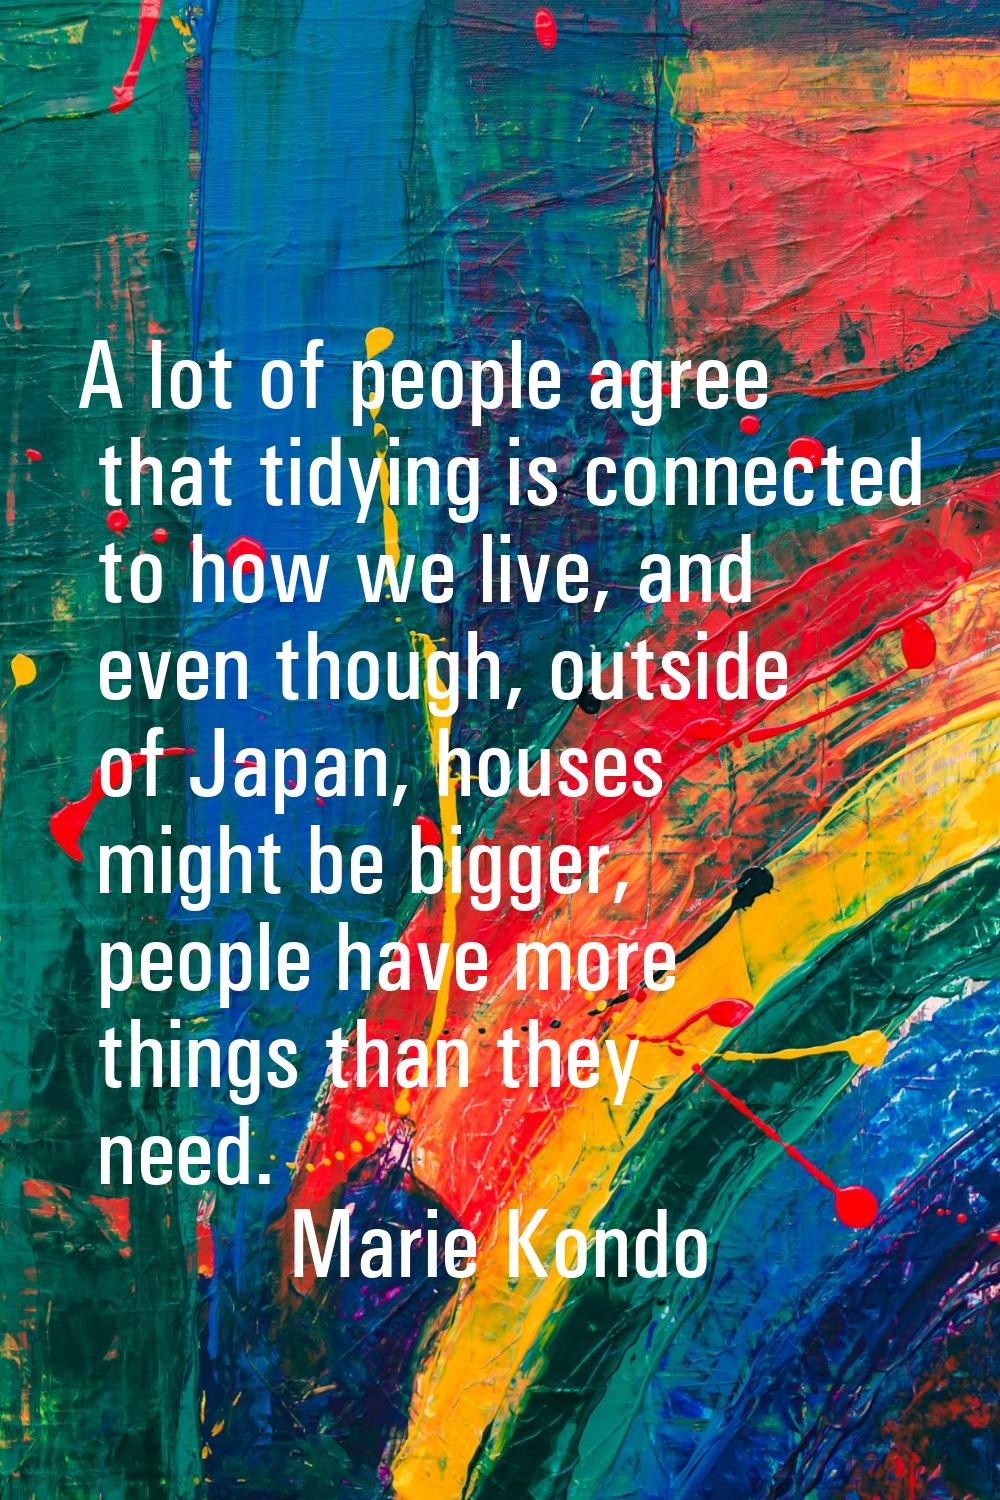 A lot of people agree that tidying is connected to how we live, and even though, outside of Japan, 